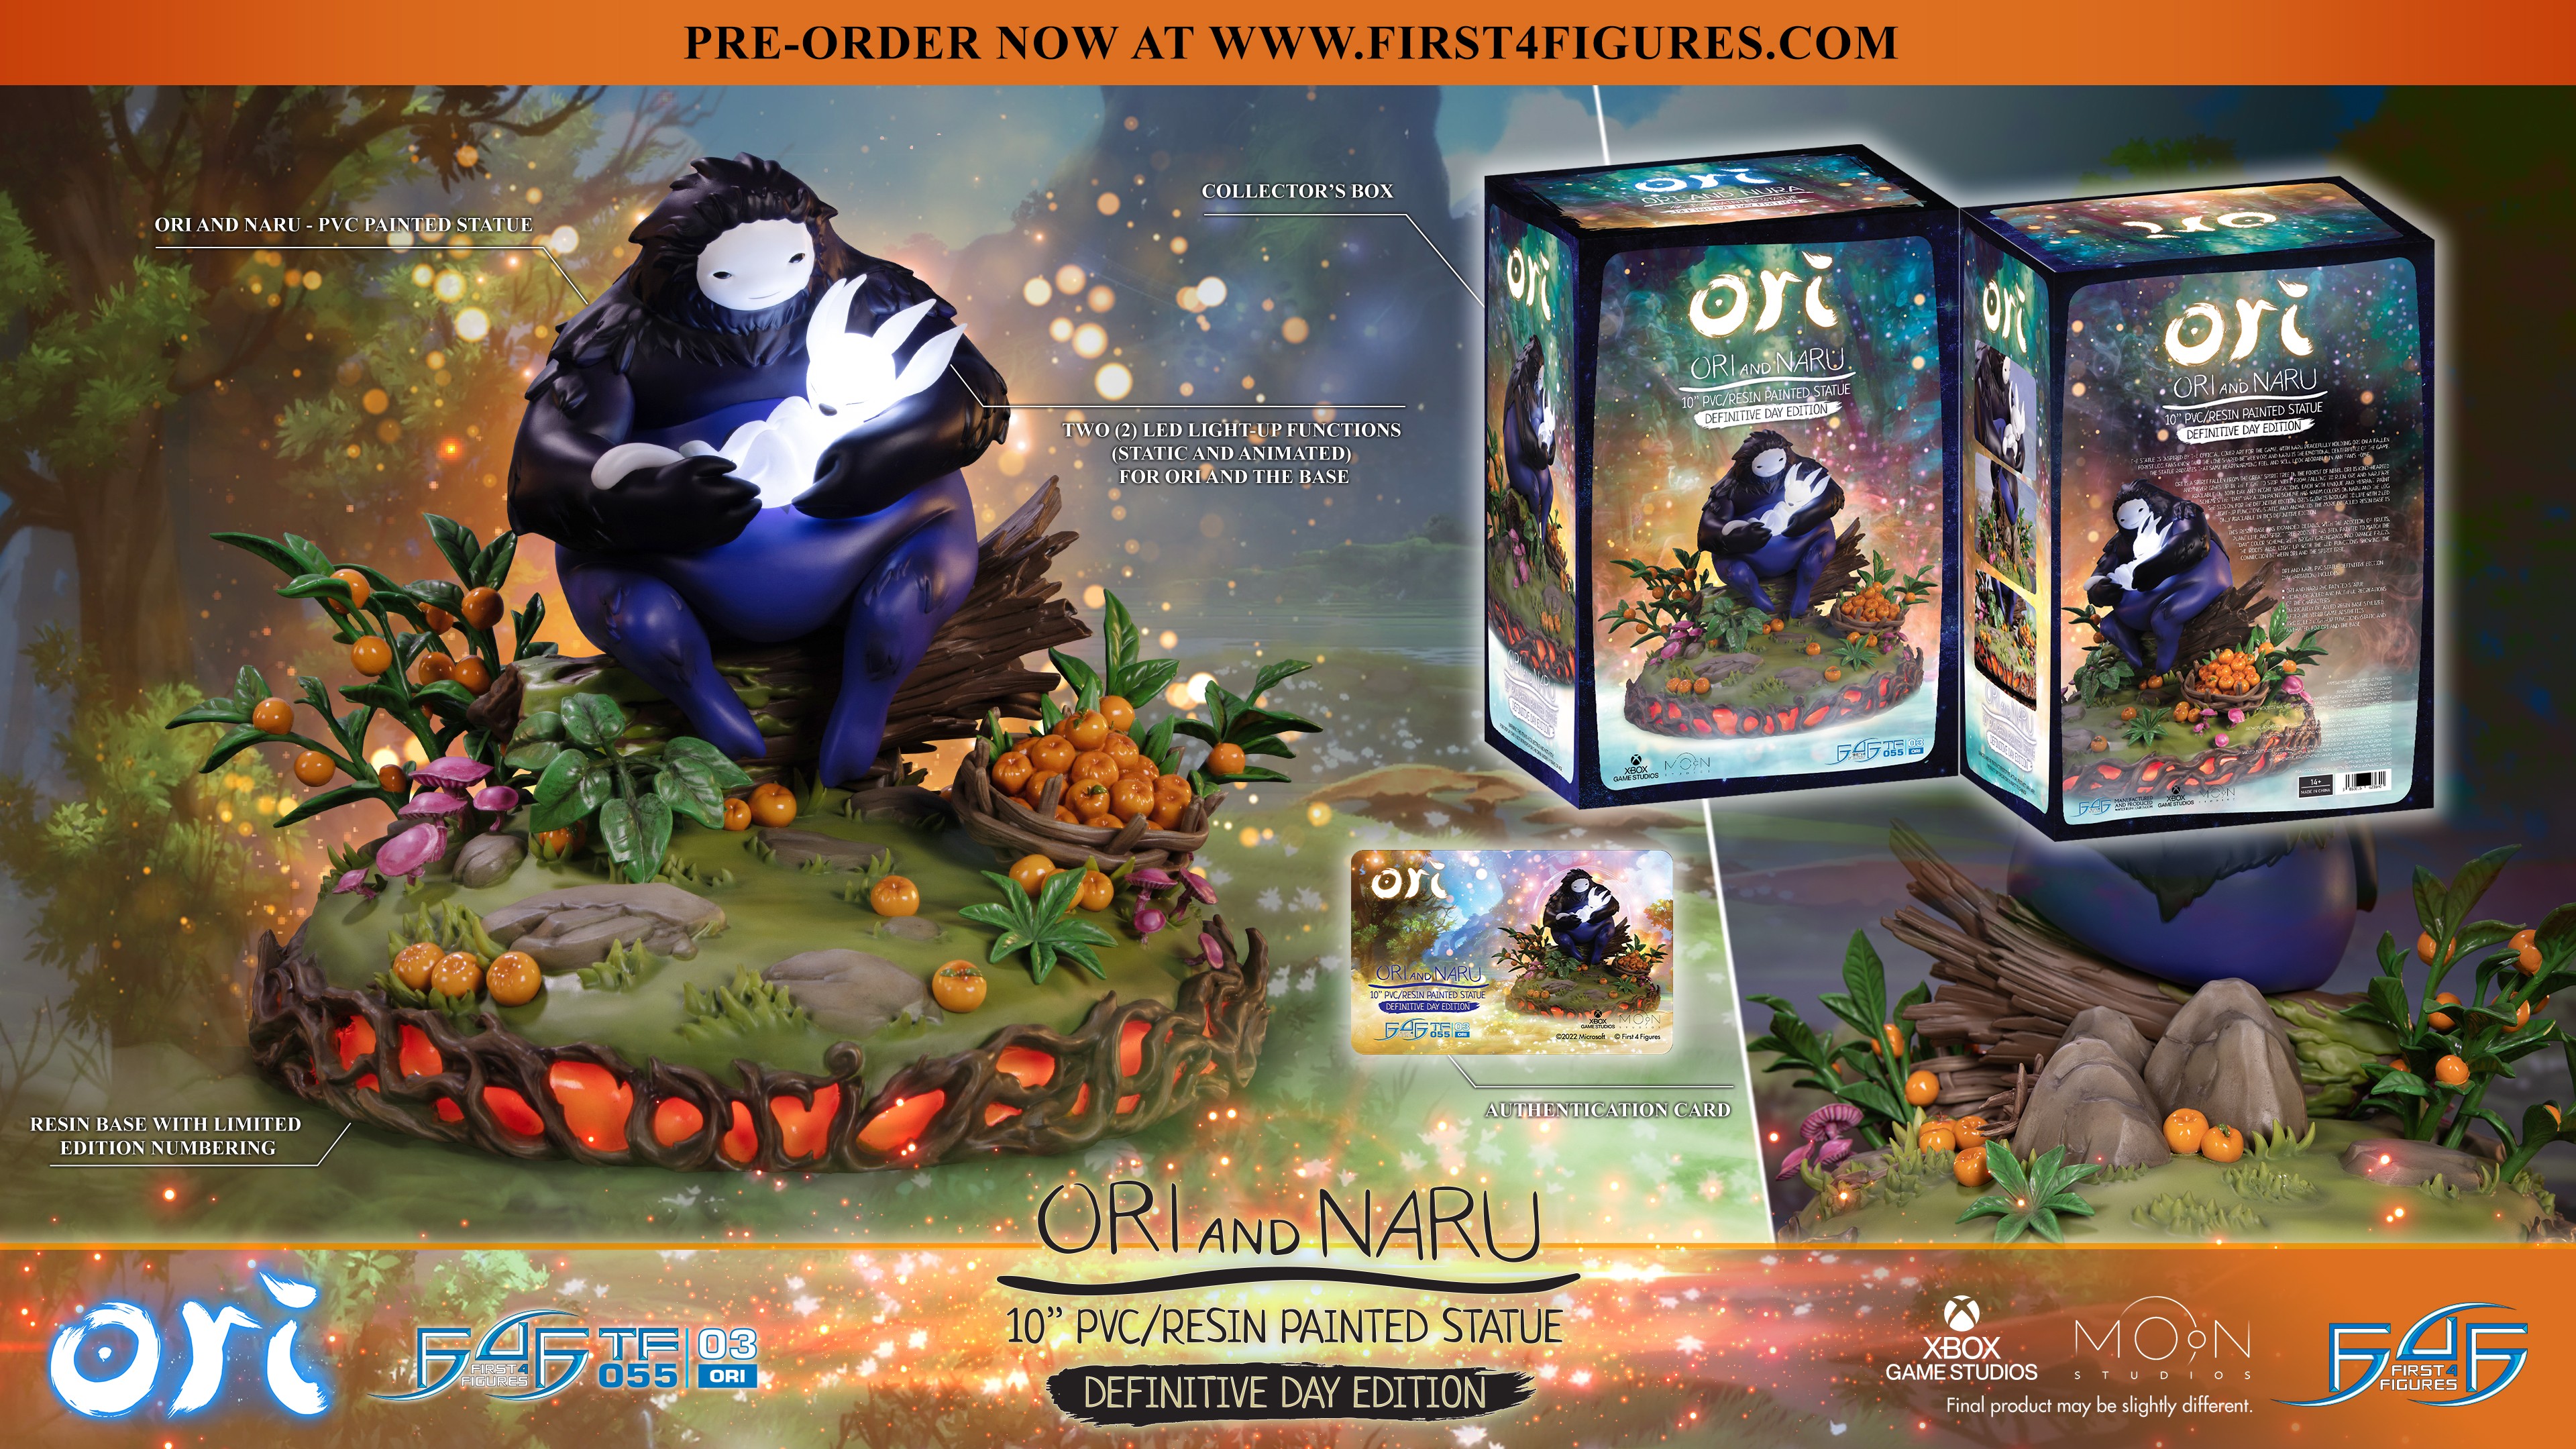 Ori and the Blind Forest™ - Ori and Naru PVC/Resin Statue Definitive Edition [Day Variation]